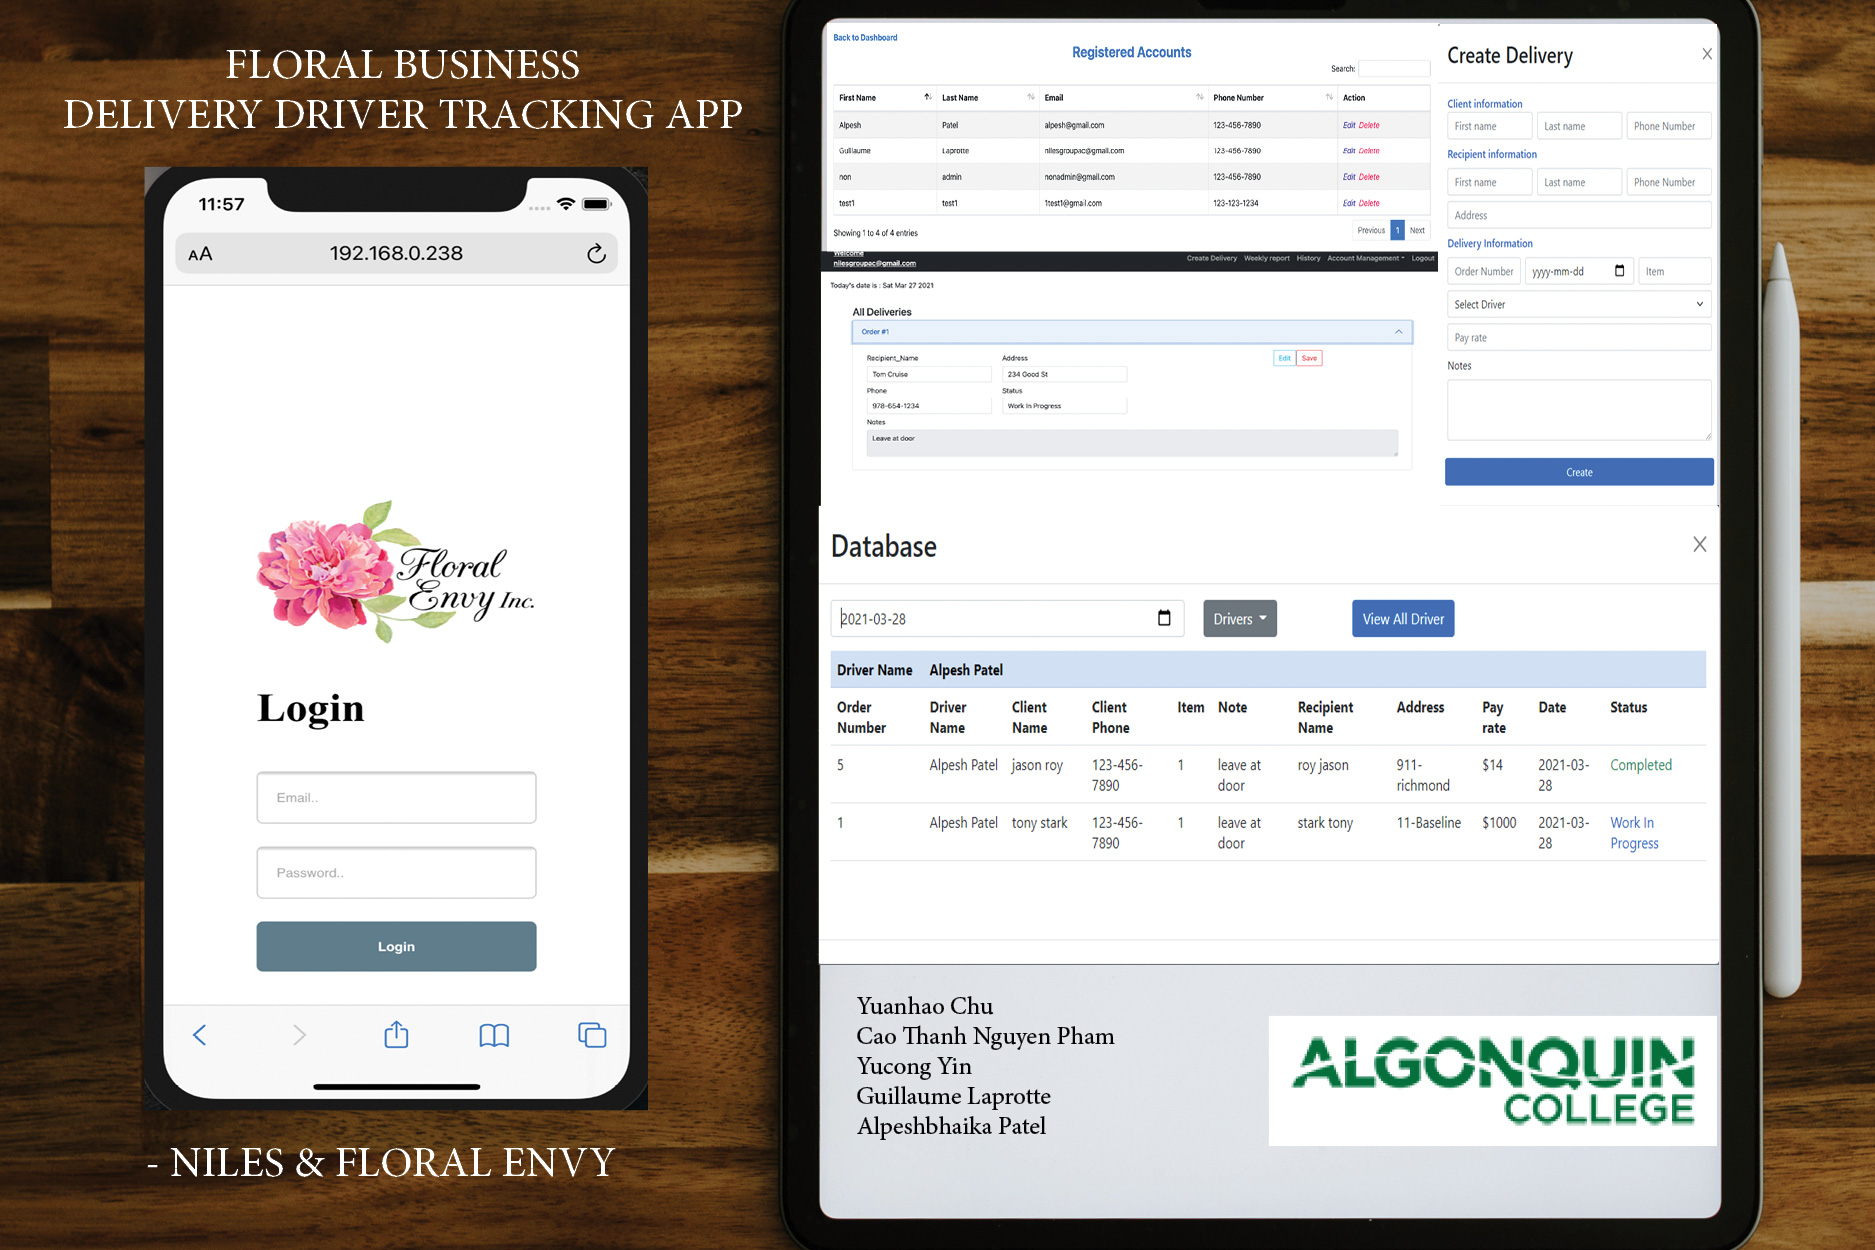 Order Tracking Application for local florist